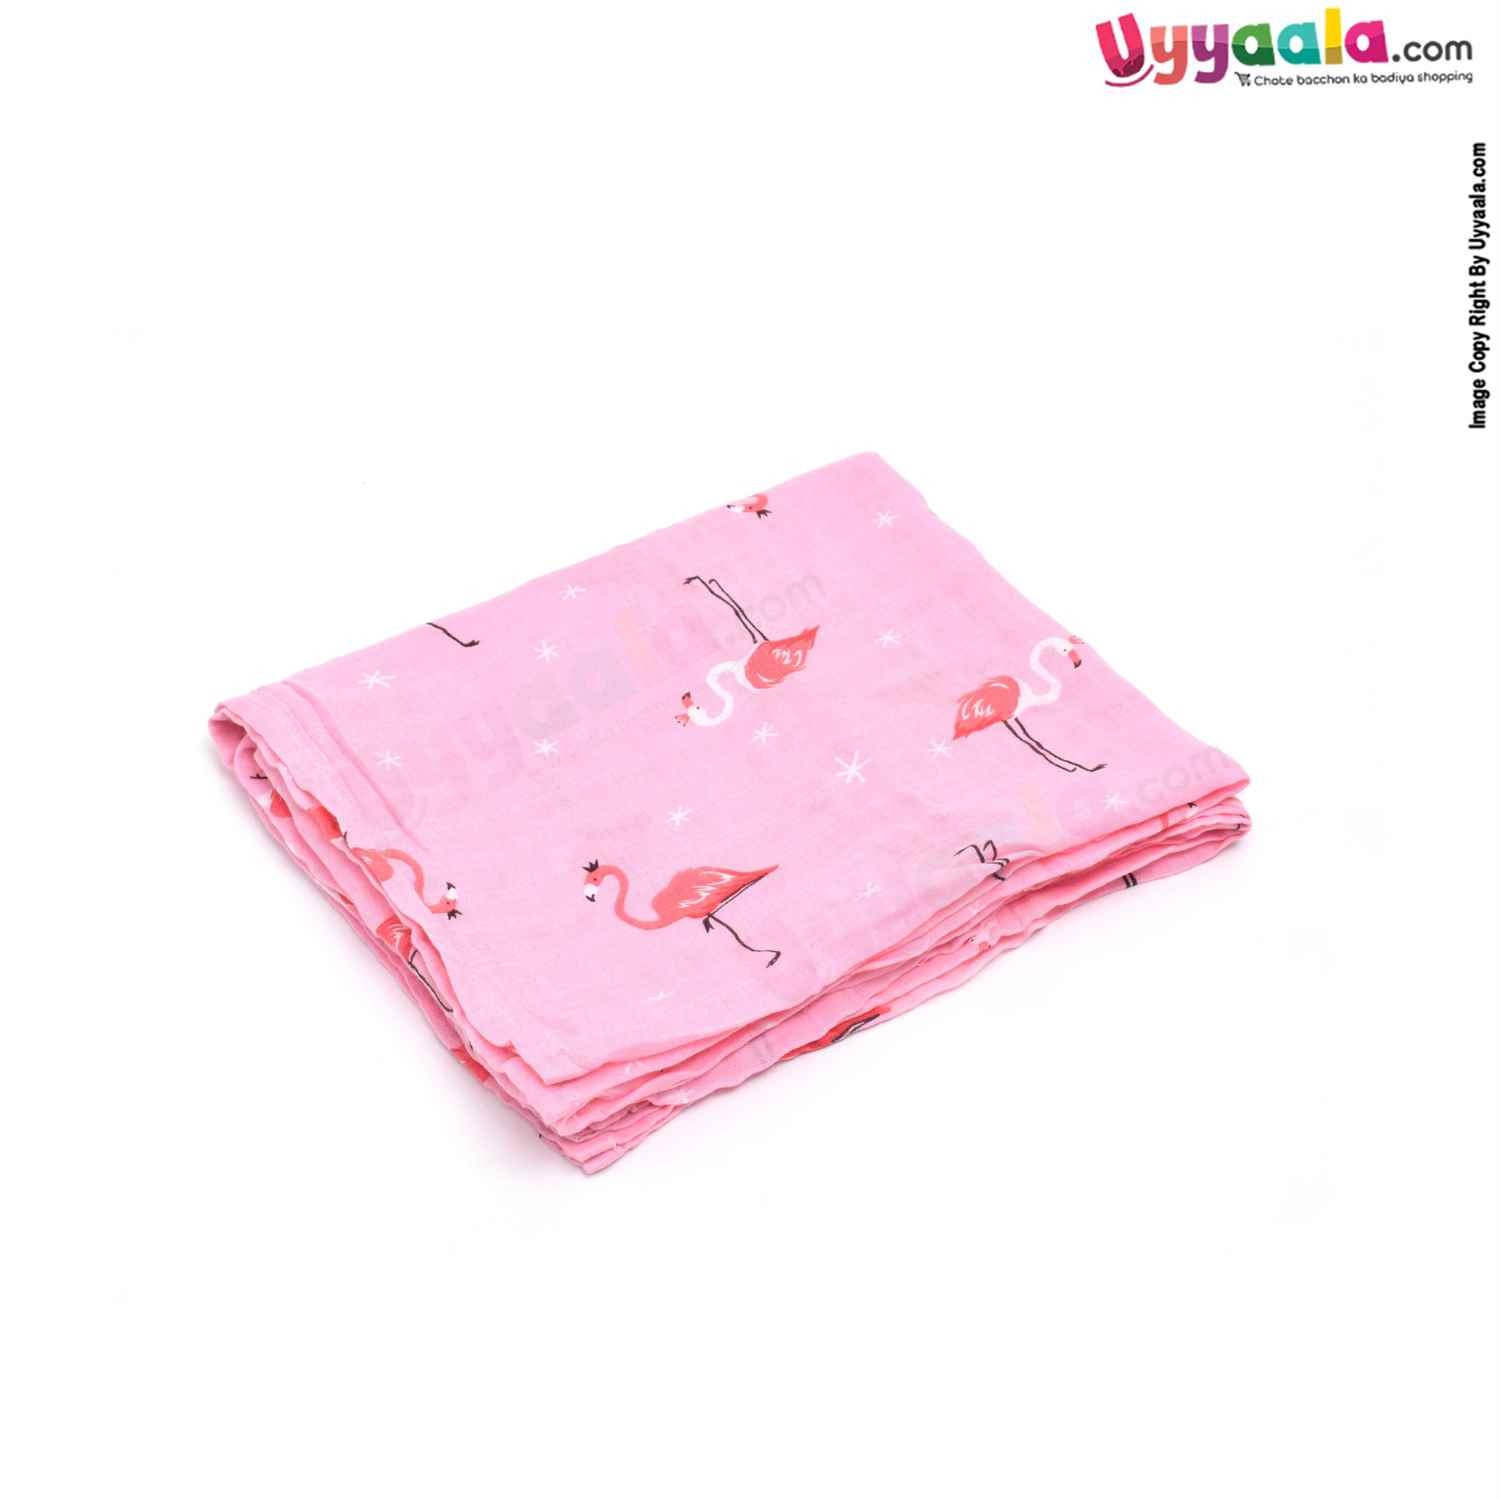 Muslin Swaddle Wrapper with Crane Bird Print for Babies 0-12m Age, Size(124*104cm)- Pink